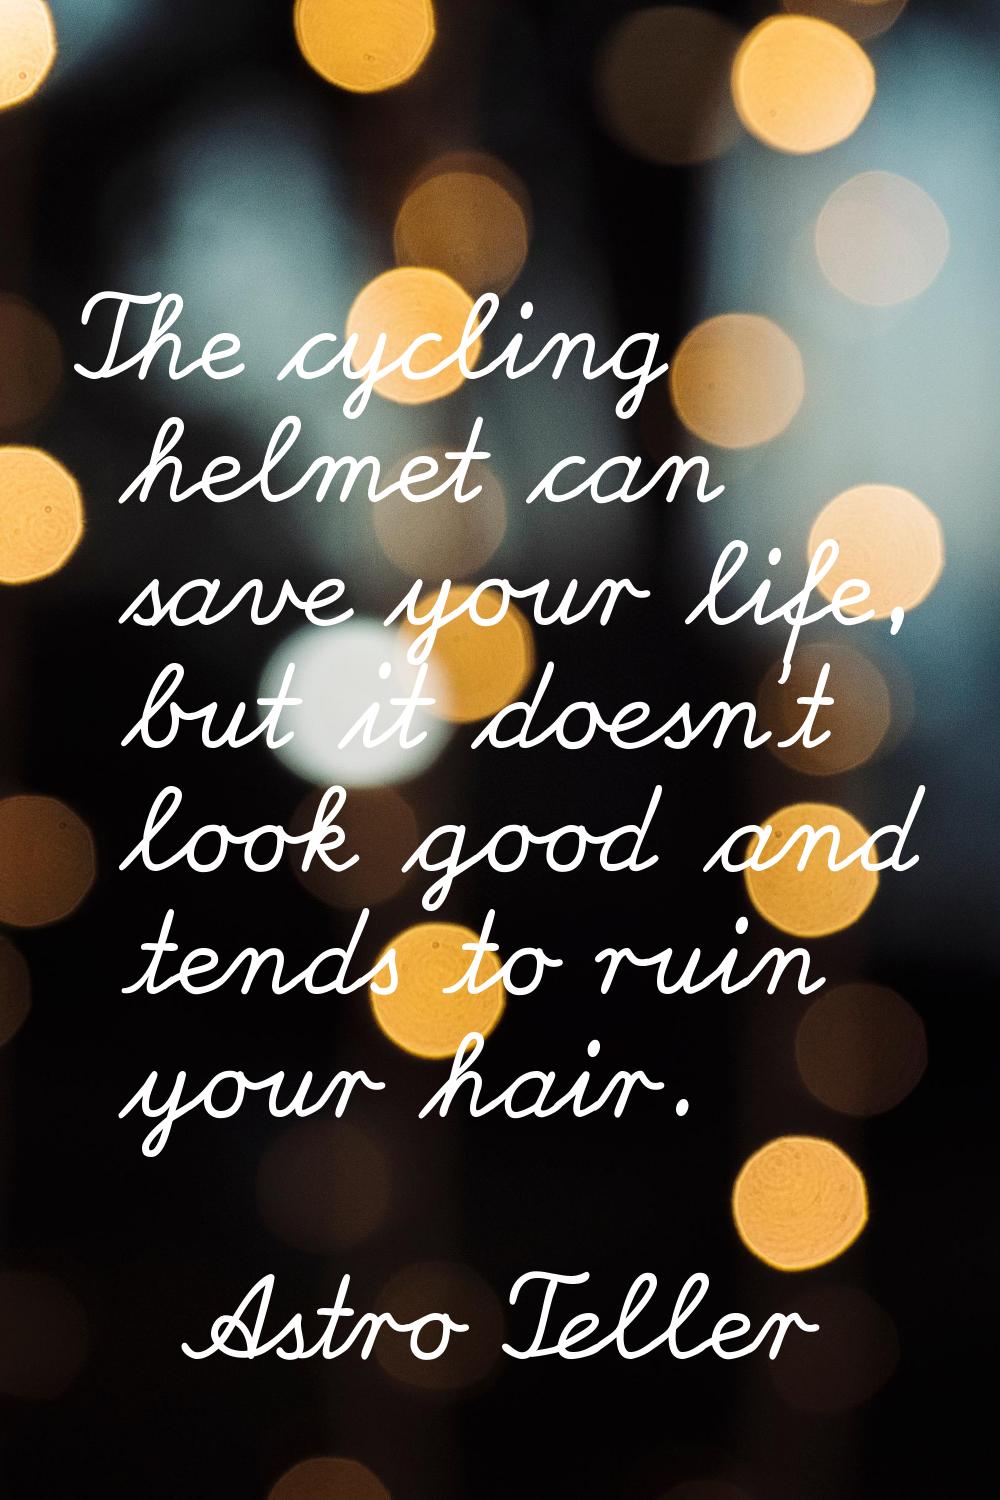 The cycling helmet can save your life, but it doesn't look good and tends to ruin your hair.